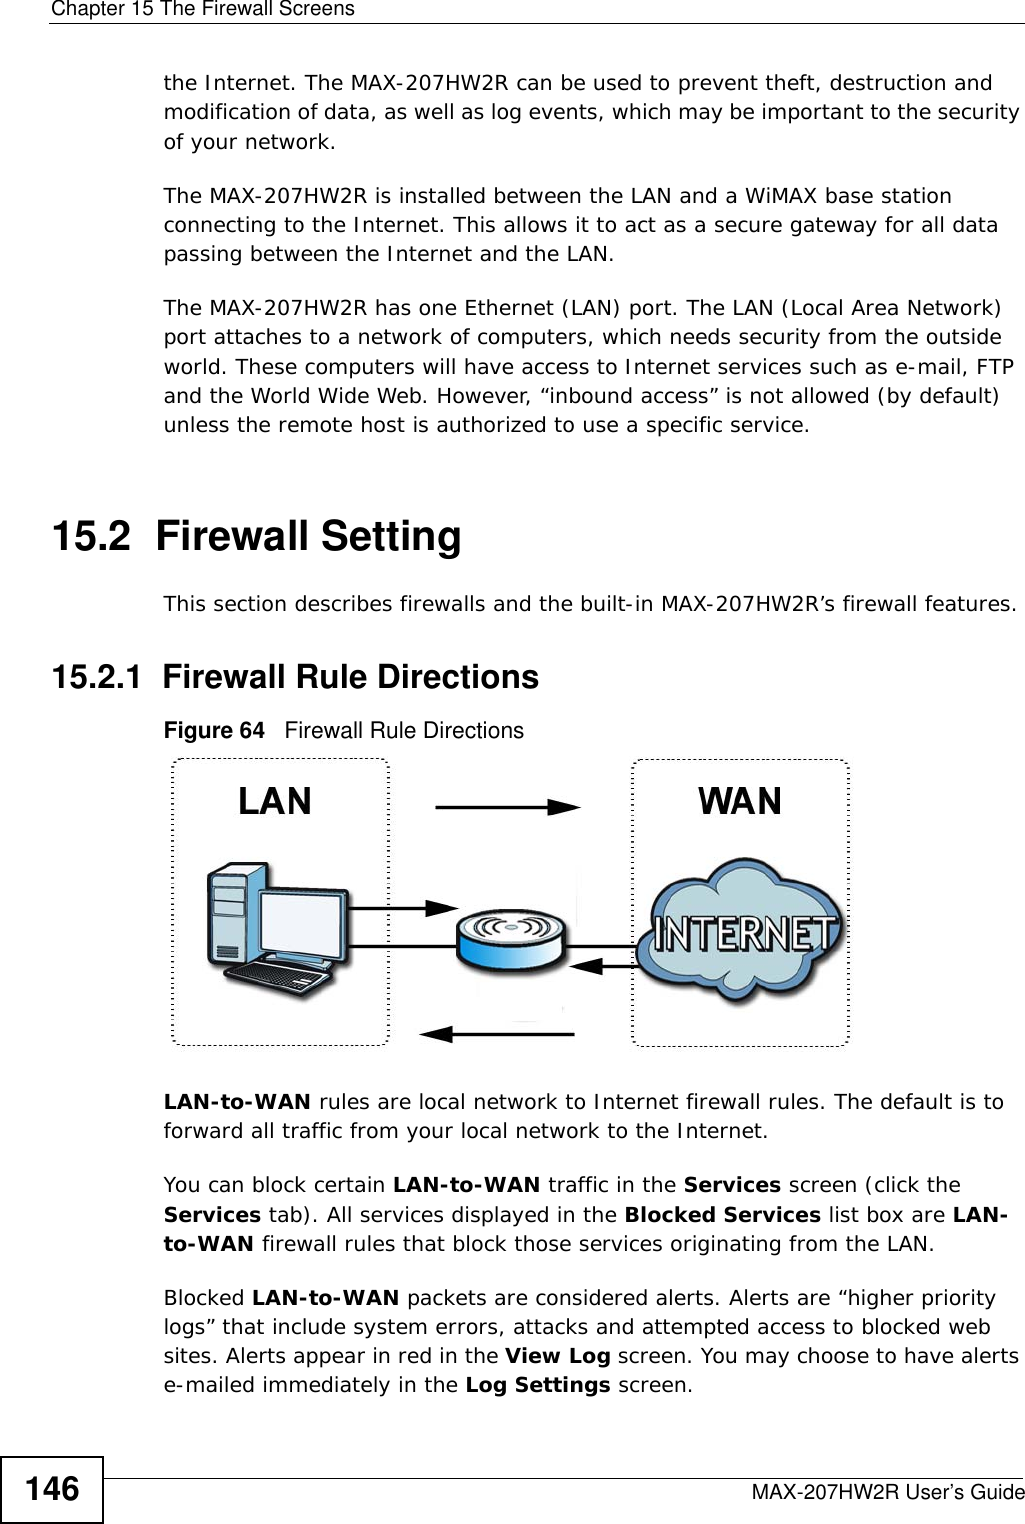 Chapter 15 The Firewall ScreensMAX-207HW2R User’s Guide146the Internet. The MAX-207HW2R can be used to prevent theft, destruction and modification of data, as well as log events, which may be important to the security of your network. The MAX-207HW2R is installed between the LAN and a WiMAX base station connecting to the Internet. This allows it to act as a secure gateway for all data passing between the Internet and the LAN.The MAX-207HW2R has one Ethernet (LAN) port. The LAN (Local Area Network) port attaches to a network of computers, which needs security from the outside world. These computers will have access to Internet services such as e-mail, FTP and the World Wide Web. However, “inbound access” is not allowed (by default) unless the remote host is authorized to use a specific service.15.2  Firewall SettingThis section describes firewalls and the built-in MAX-207HW2R’s firewall features.15.2.1  Firewall Rule DirectionsFigure 64   Firewall Rule DirectionsLAN-to-WAN rules are local network to Internet firewall rules. The default is to forward all traffic from your local network to the Internet. You can block certain LAN-to-WAN traffic in the Services screen (click the Services tab). All services displayed in the Blocked Services list box are LAN-to-WAN firewall rules that block those services originating from the LAN. Blocked LAN-to-WAN packets are considered alerts. Alerts are “higher priority logs” that include system errors, attacks and attempted access to blocked web sites. Alerts appear in red in the View Log screen. You may choose to have alerts e-mailed immediately in the Log Settings screen.